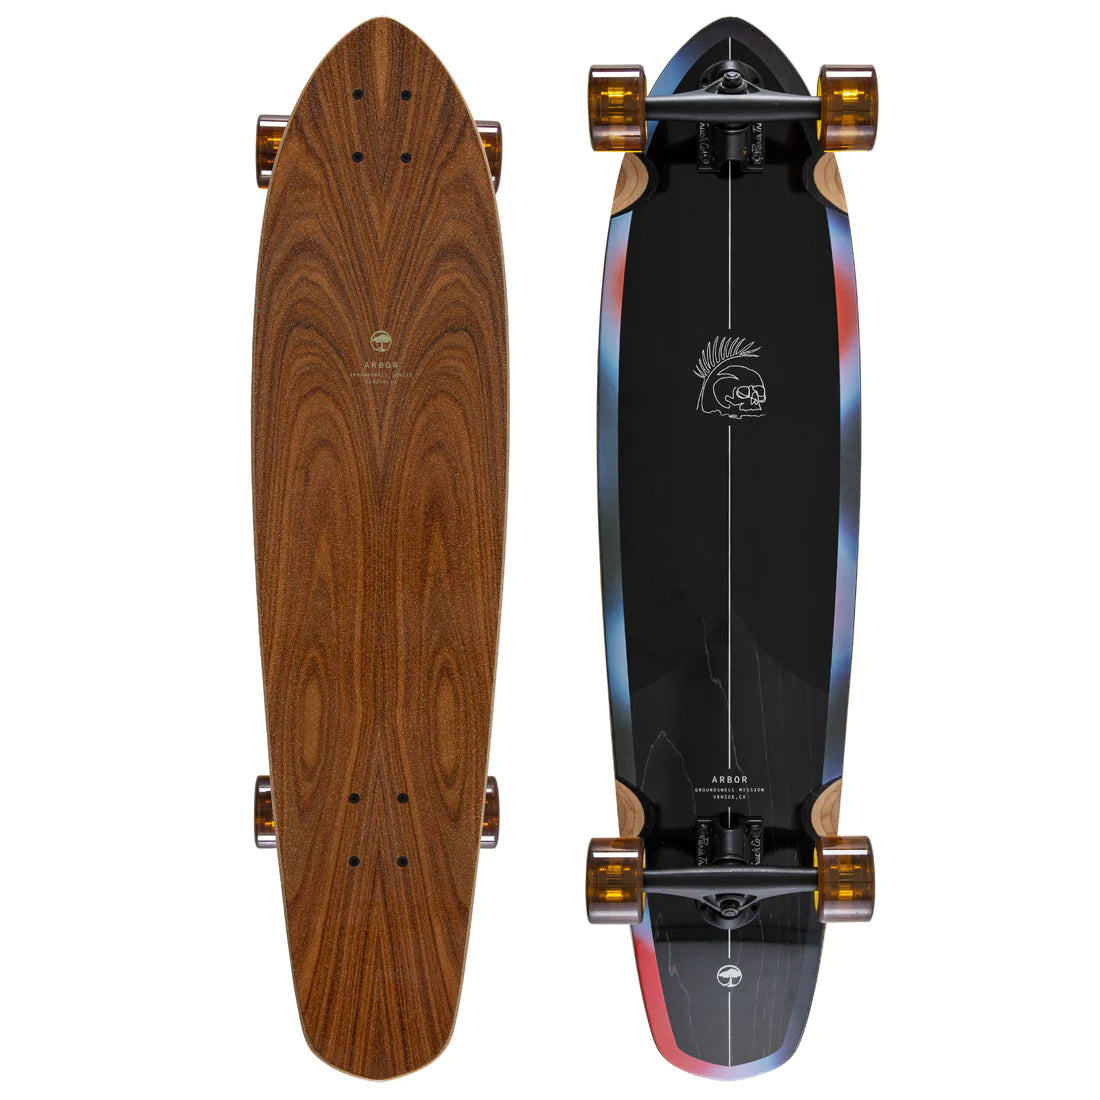 Arbor Groundswell Mission 8.625" x 35" Longboard Complete